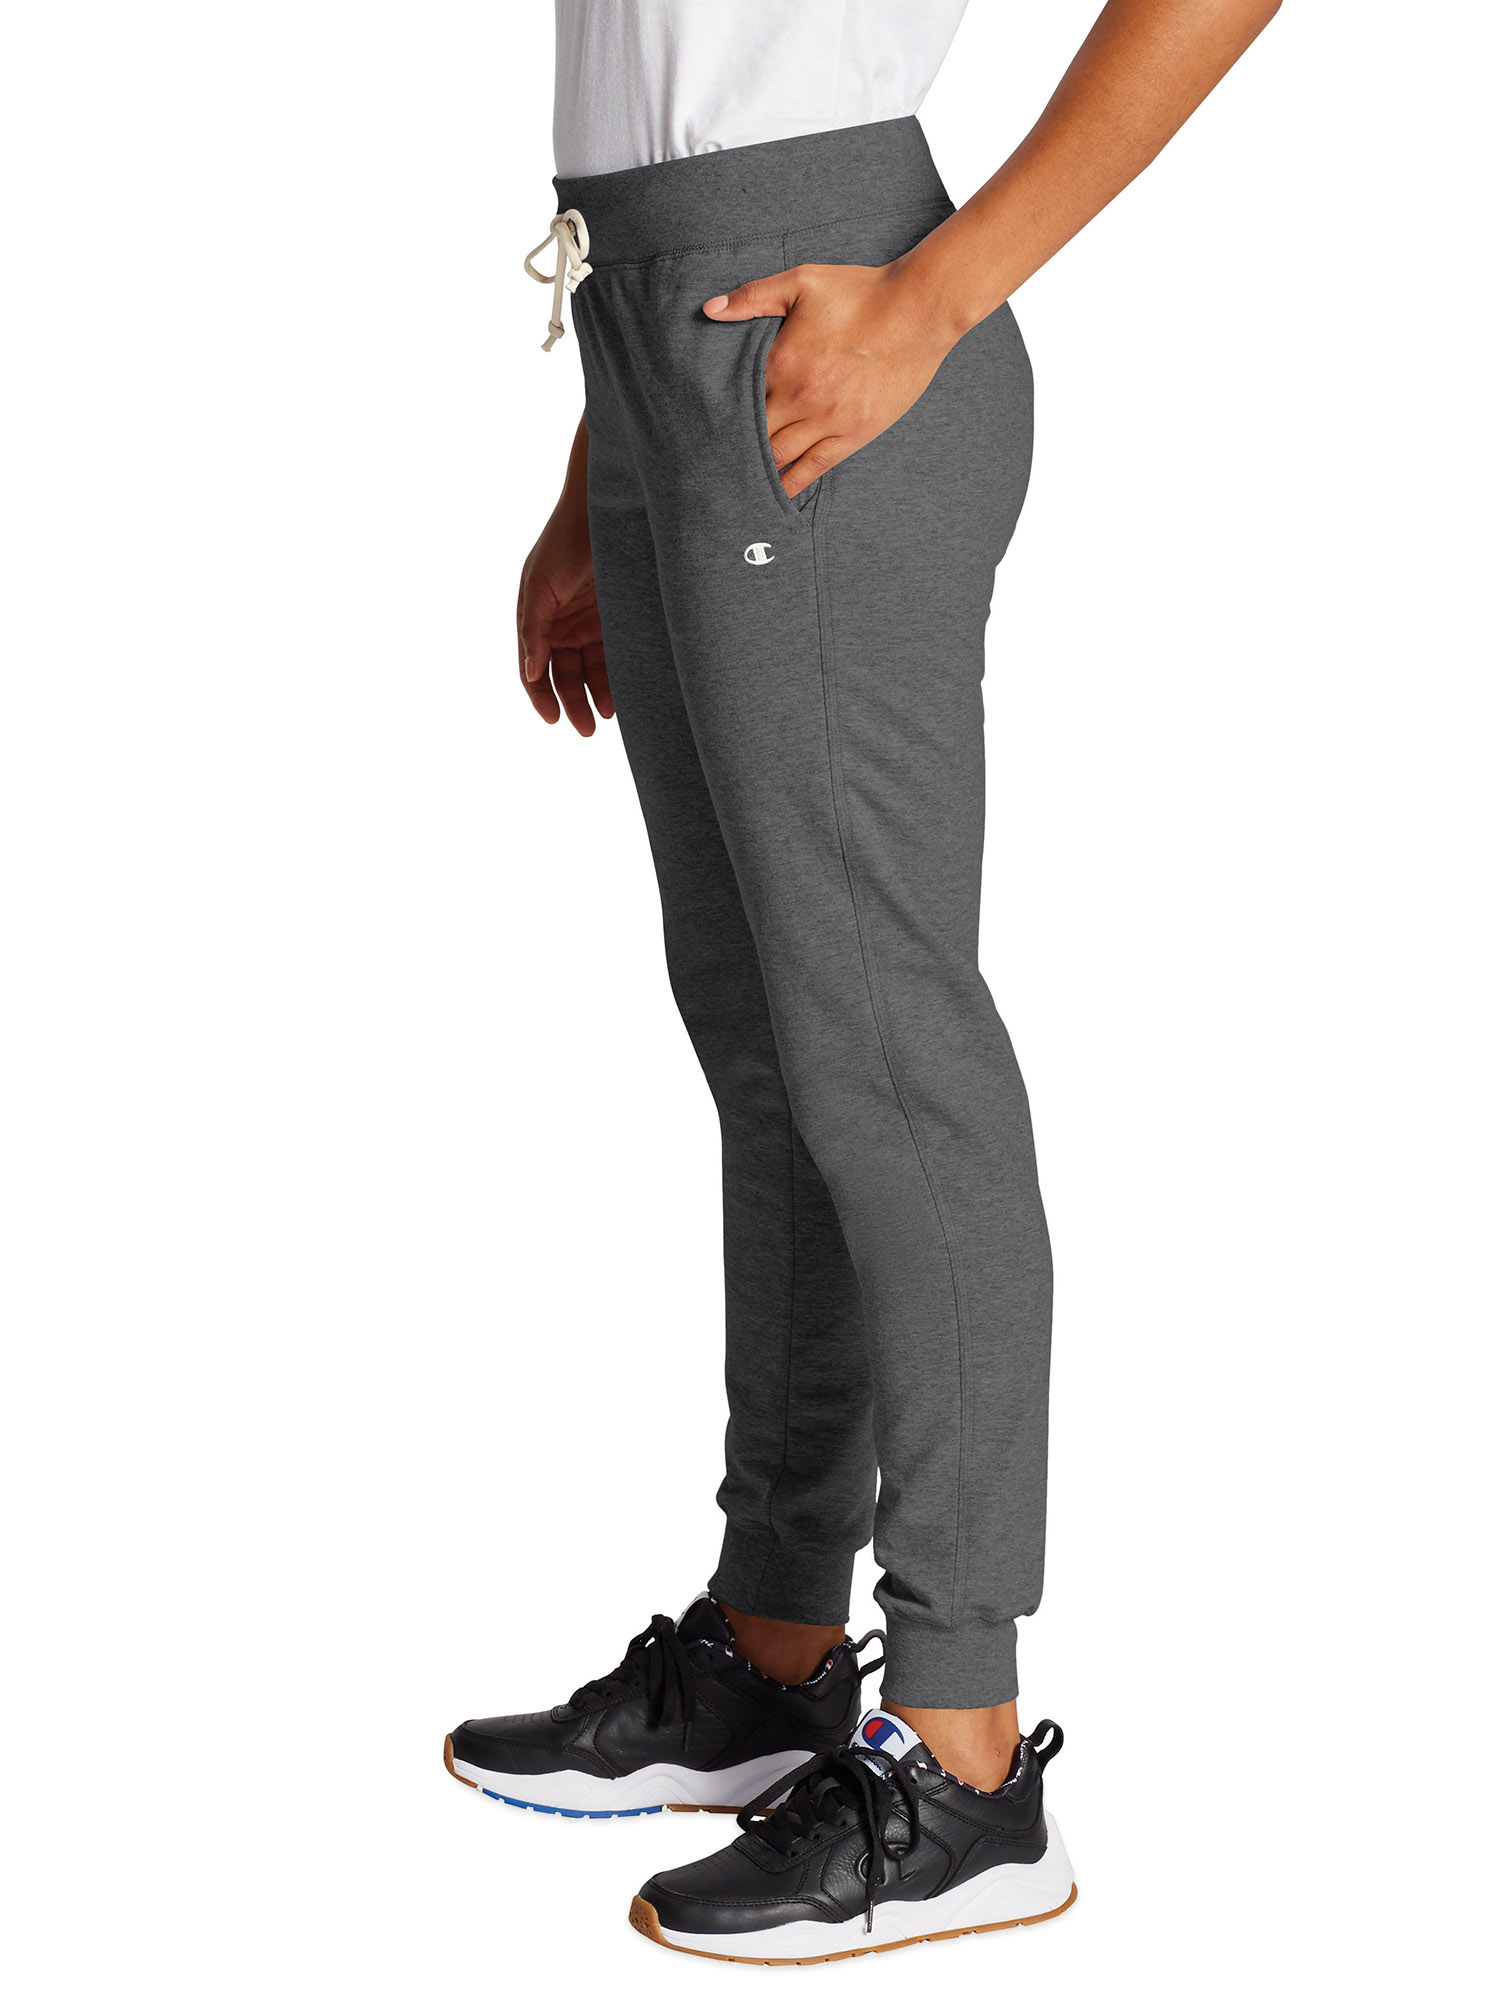 Champion Women`s French Terry Jogger Pants - image 5 of 5